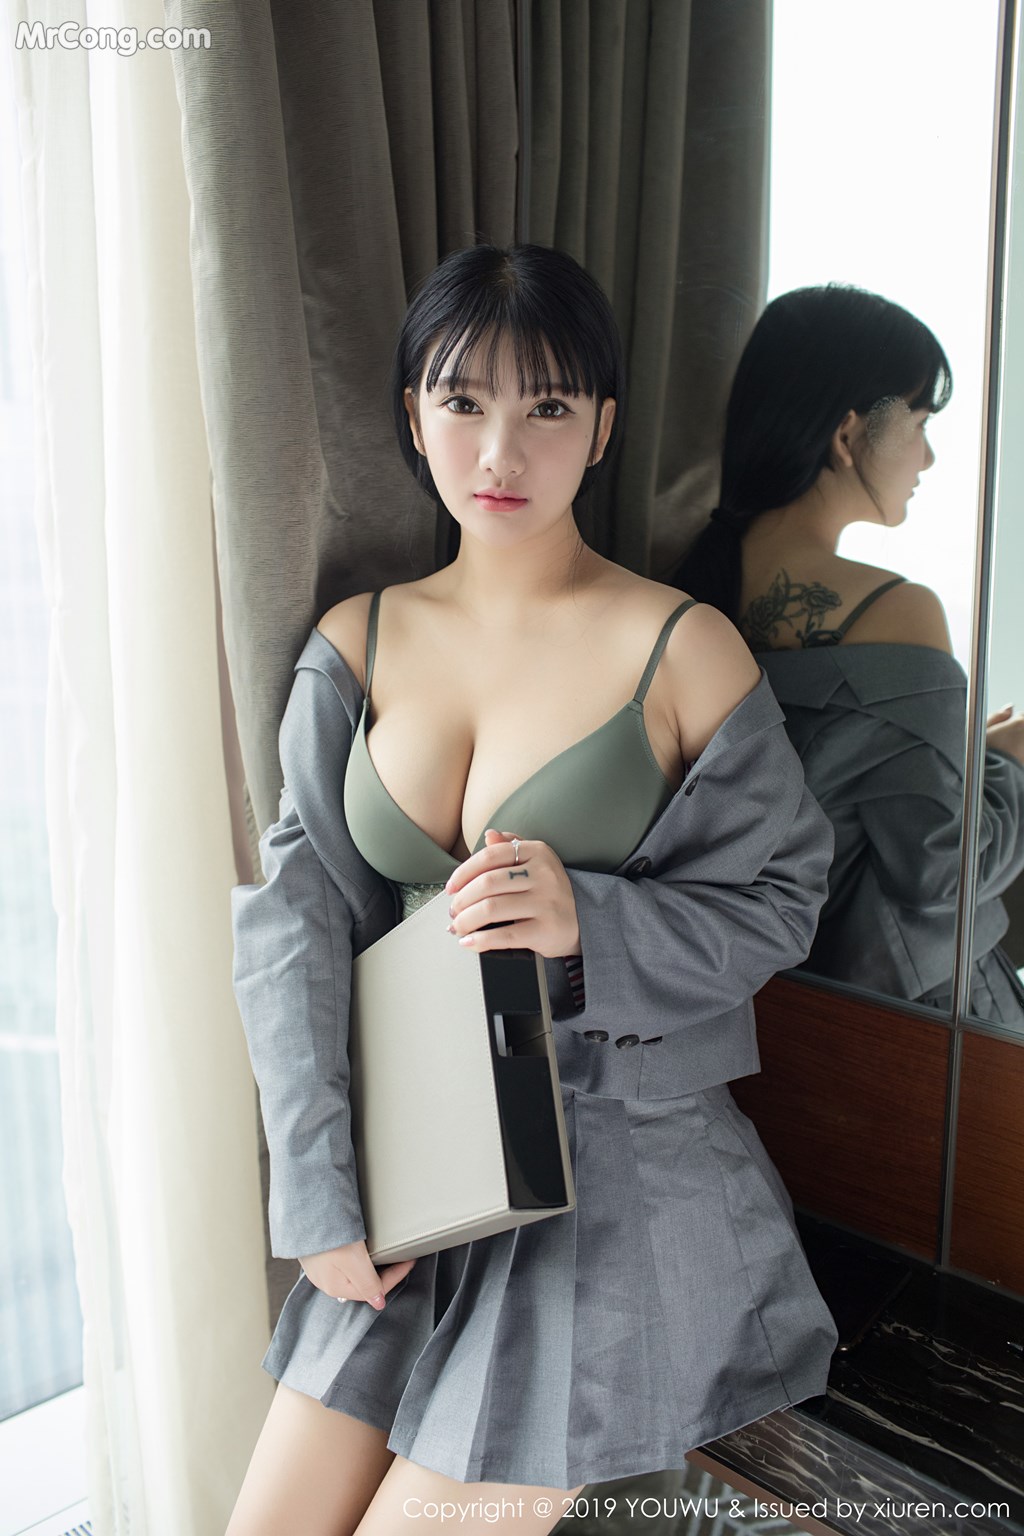 YouWu Vol.138: Xiao You Nai (小 尤奈) (60 pictures)